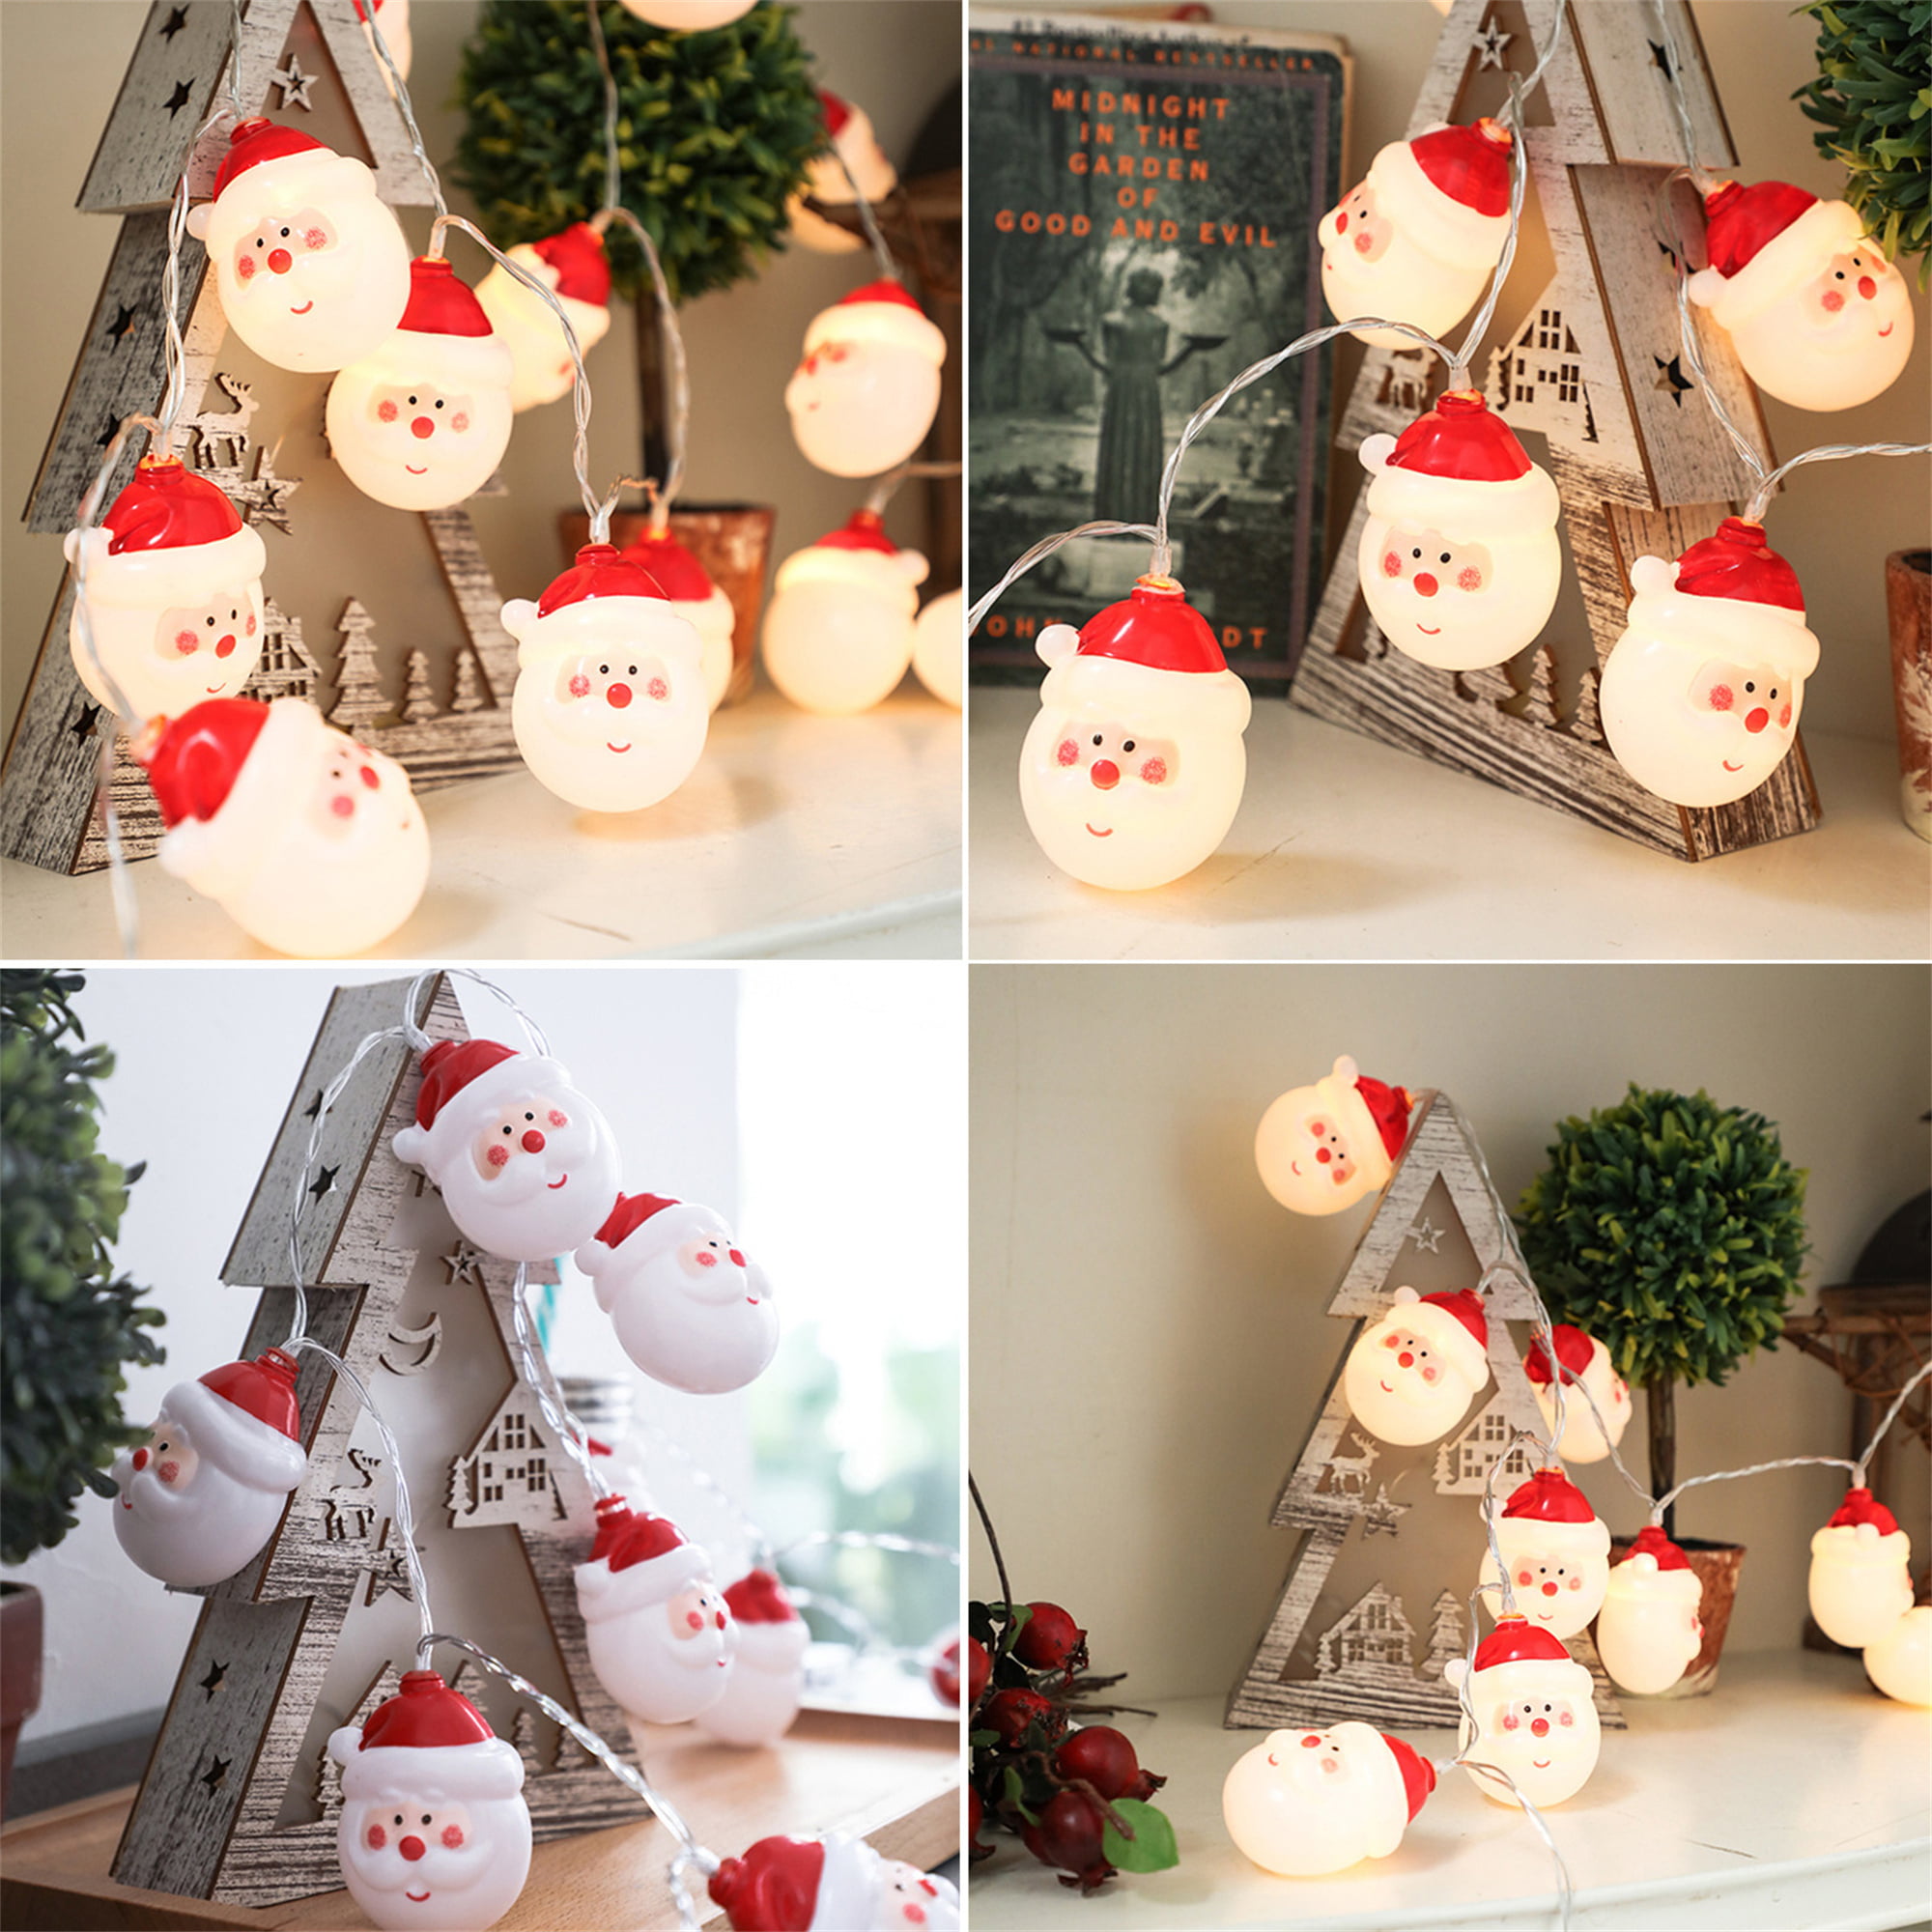 Details about   2M LED Christmas Fairy String Light Lamps Xmas Party Santa Tree Hanging Decor US 